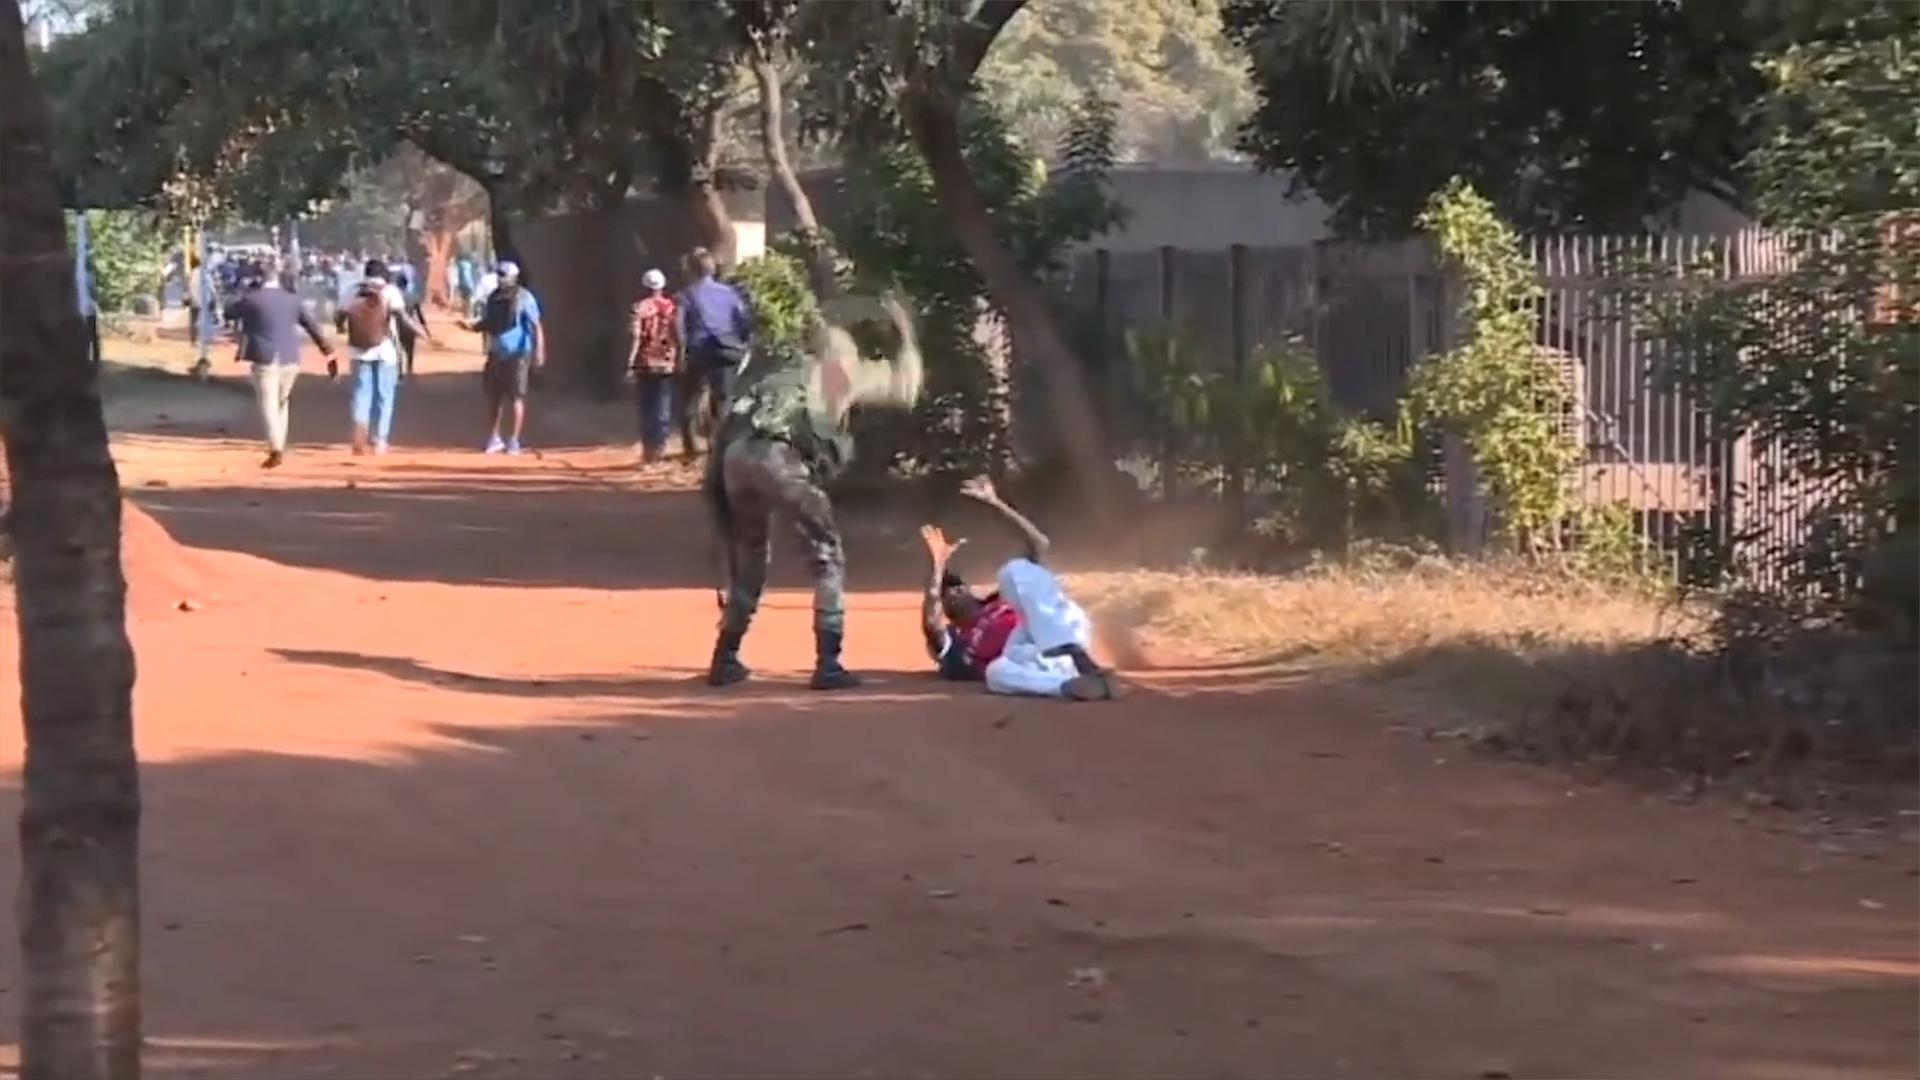 A man is beaten by a Zimbabwean soldier after protests broke out across the country on January 14, 2019.